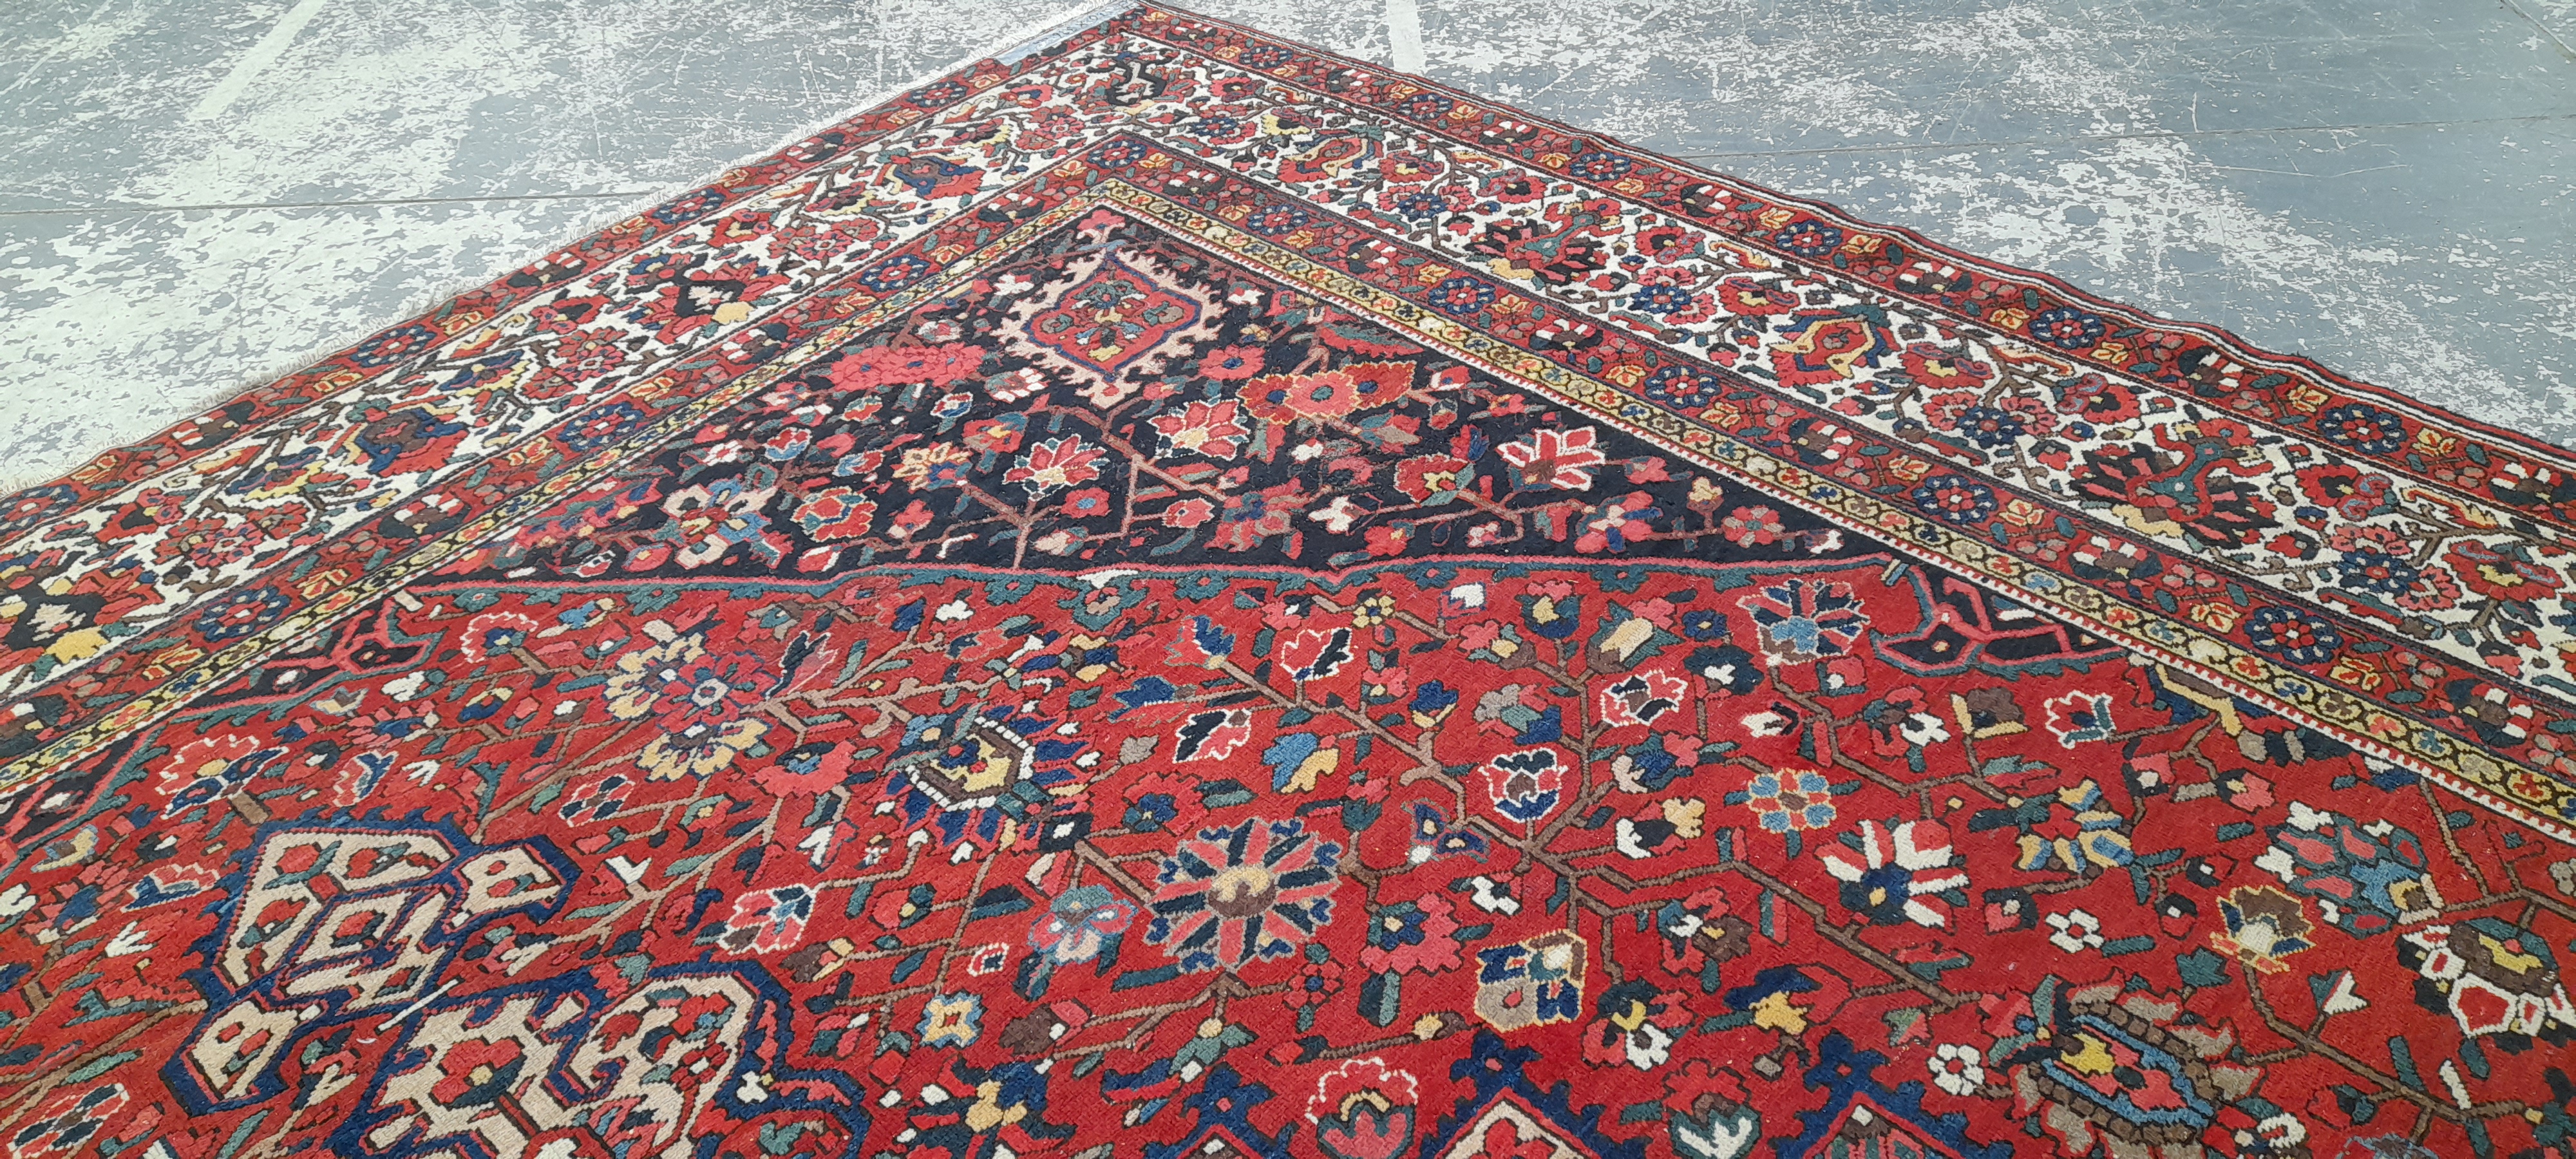 A COUNTRY HOUSE PERSIAN BAHKTIARI CARPET. 560 x 396cms - Image 7 of 8